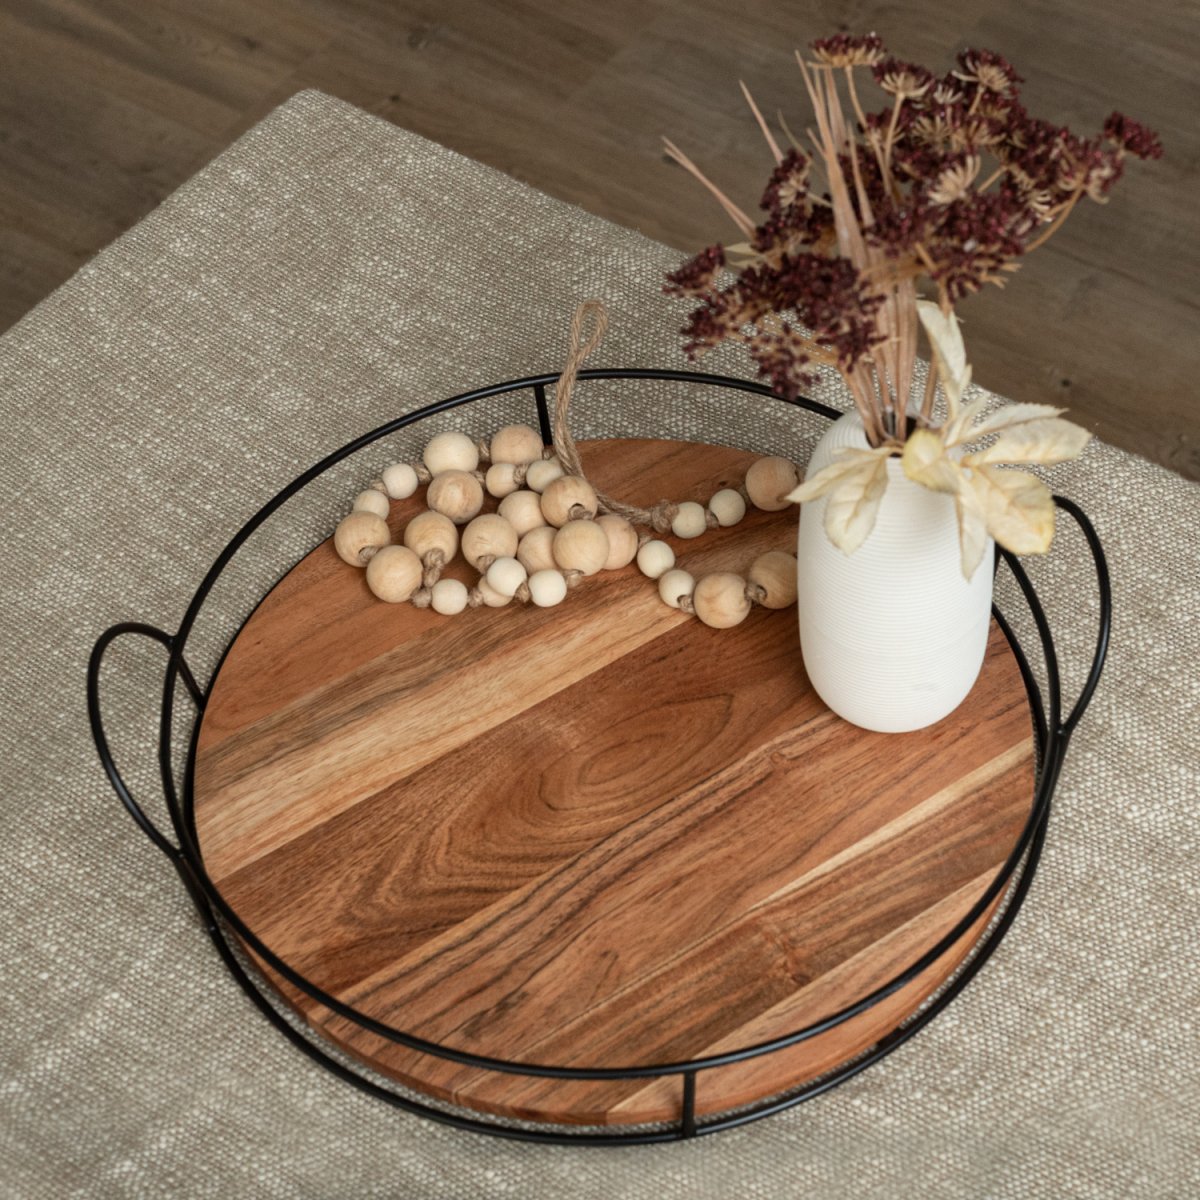 Round Wooden Decor Tray with black metal handles top image - Aesthetic Living